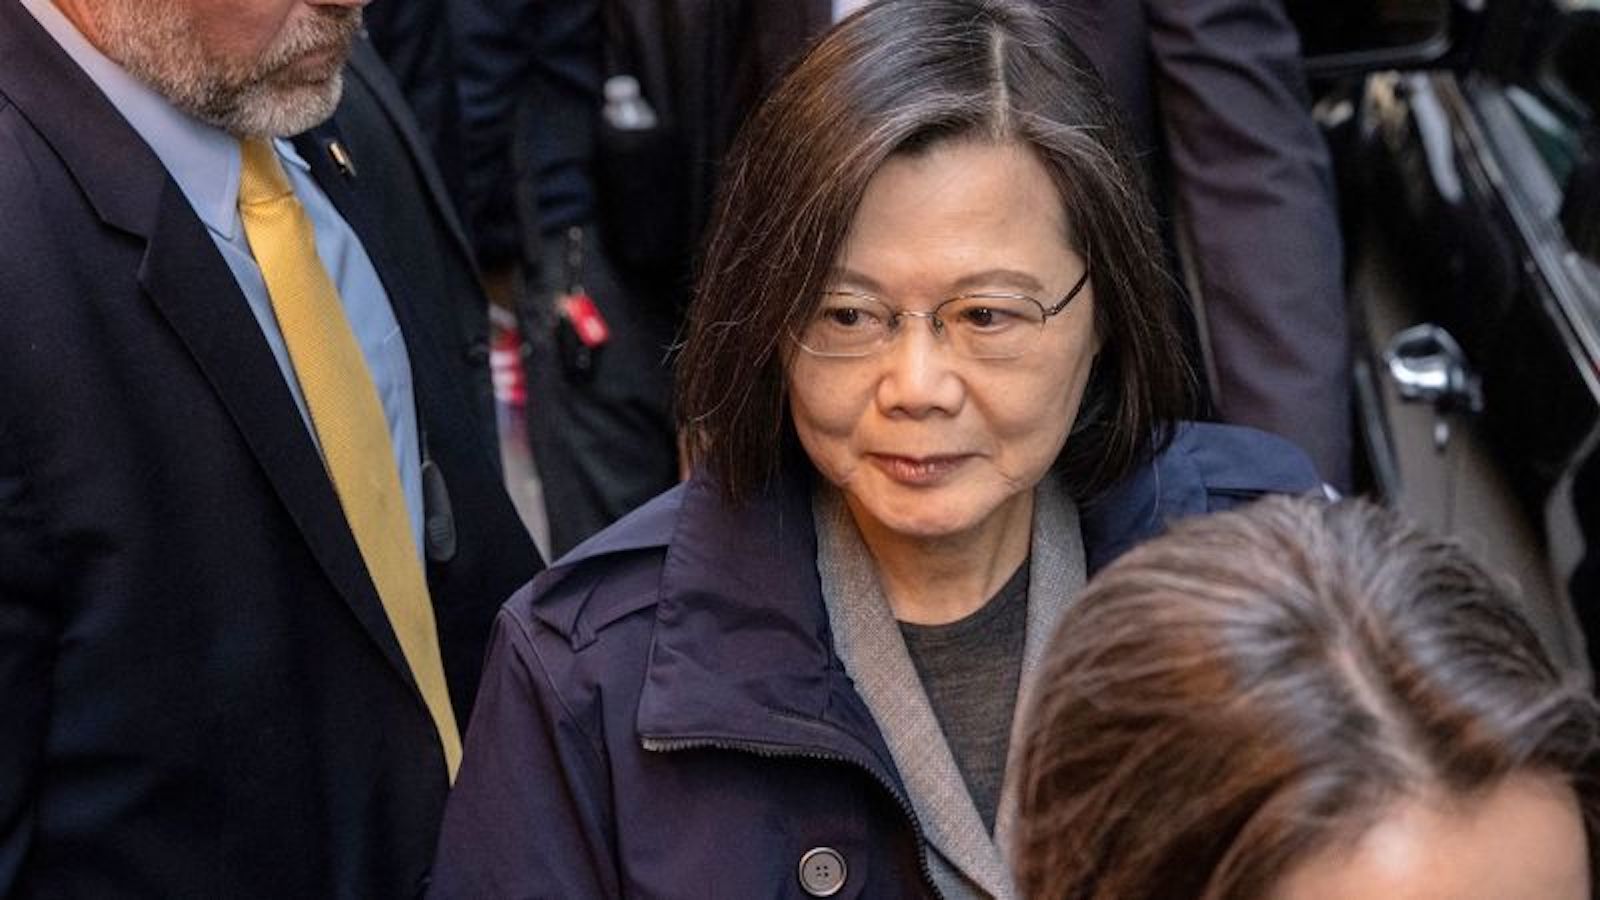 Beijing warns of a “serious impact” on US-China relations with Taiwan’s President’s visit to New York